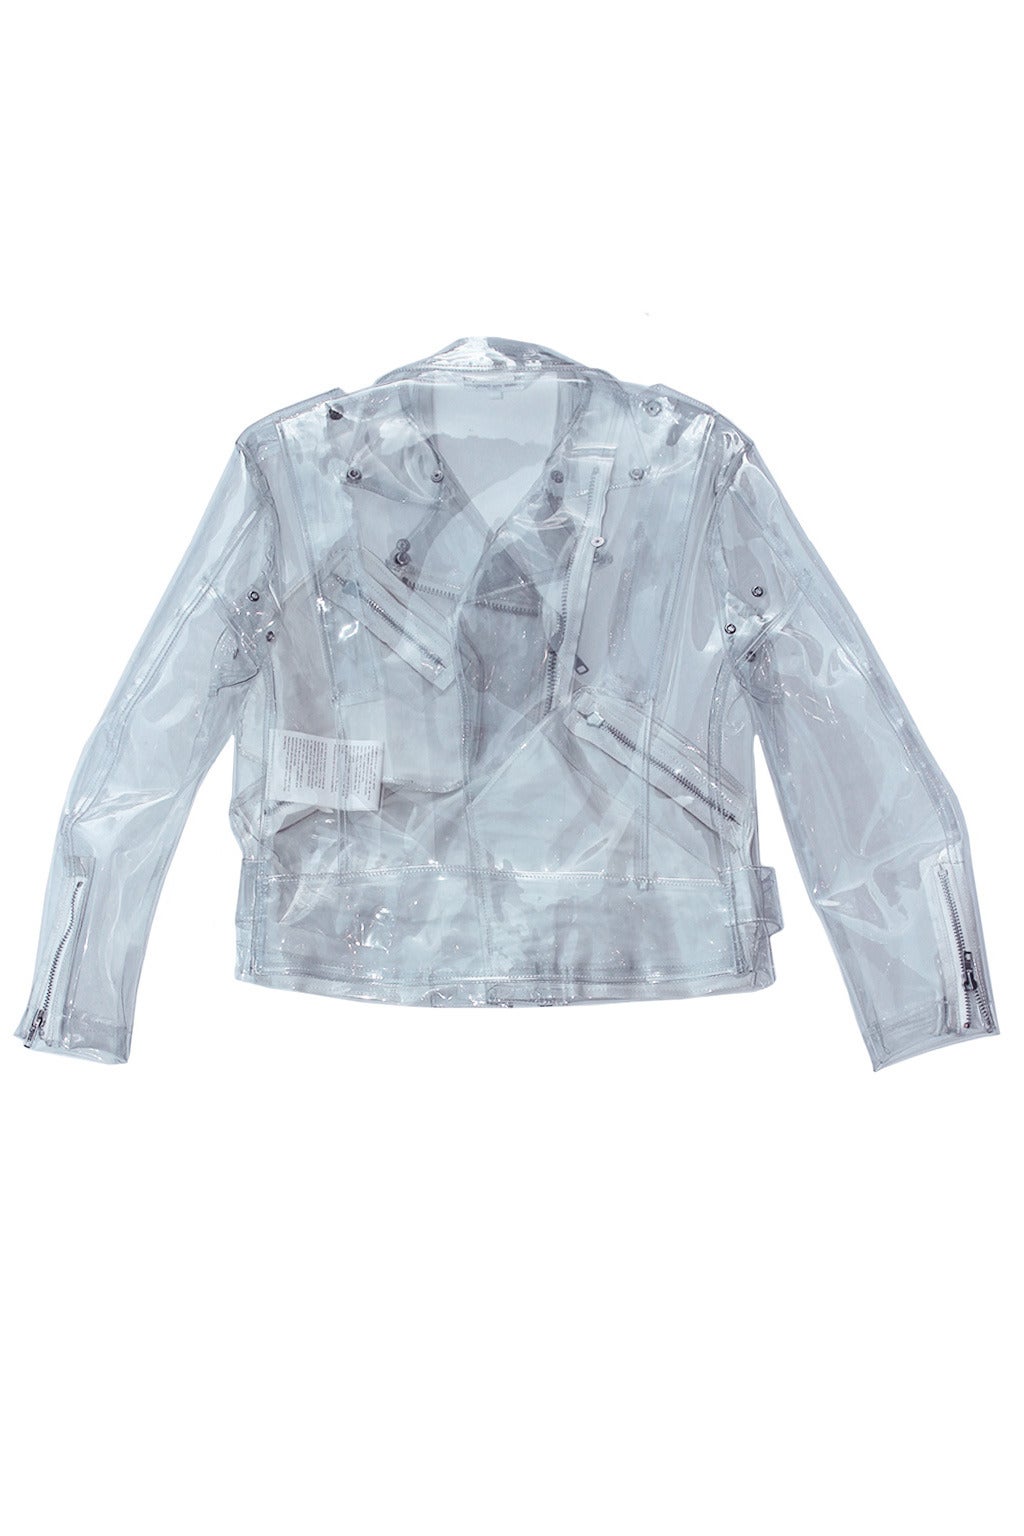 This transparent biker jacket has a belt, cotton lining, and four zip pockets. A classic motorcycle jacket done in a clear acrylic, this piece is outrageous!